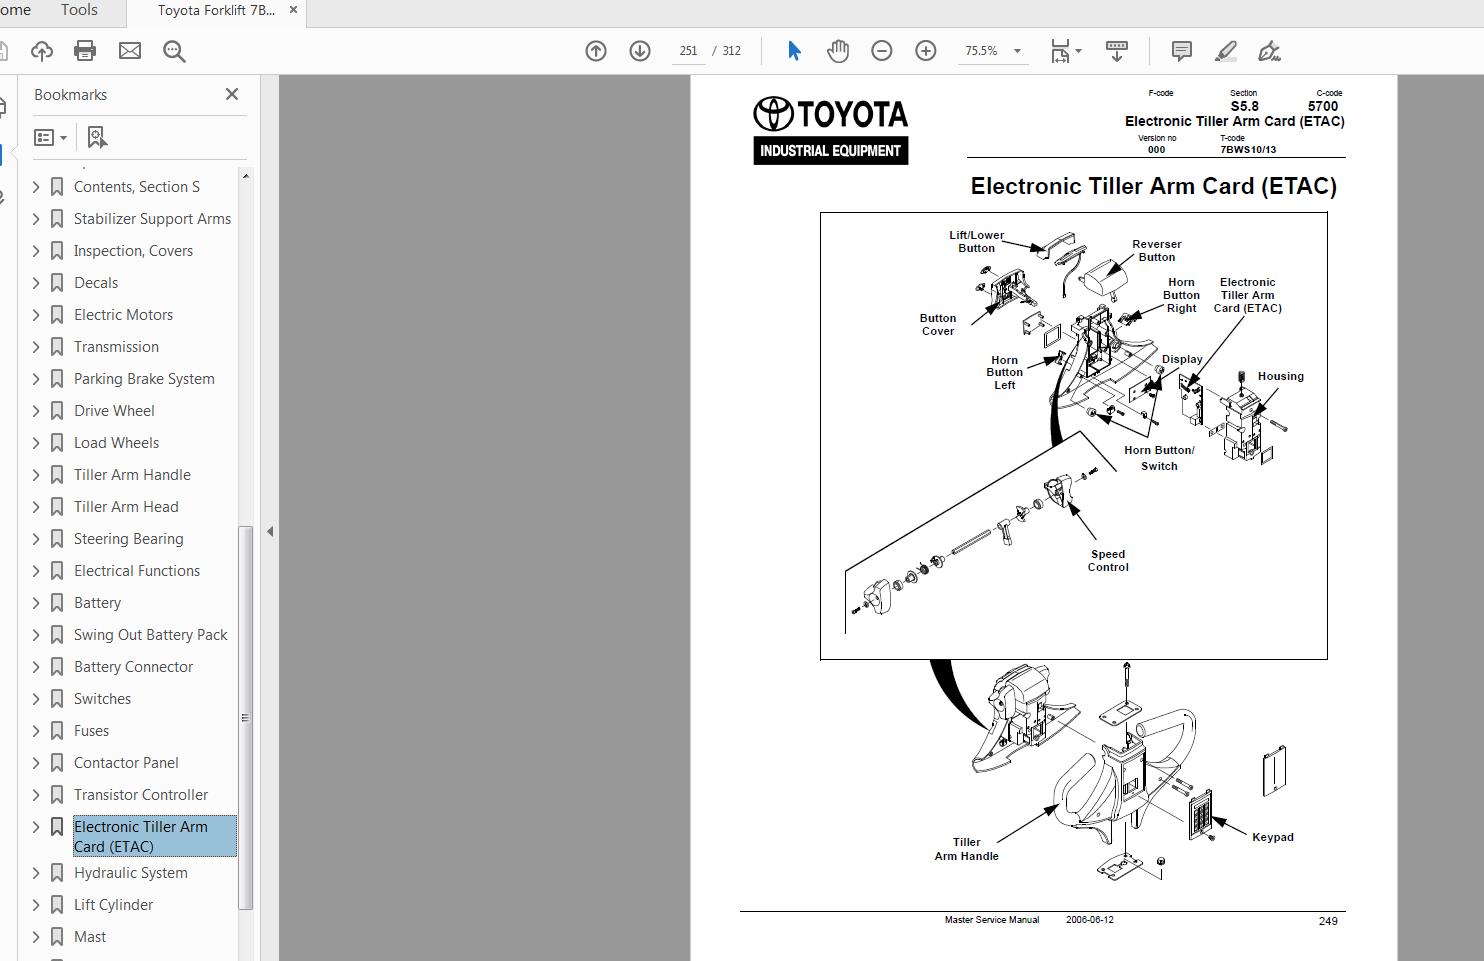 Toyota Forklift 7bws10 13 Sn 40500 And Up Master Service Manual Cl3ws 06 Auto Repair Manual Forum Heavy Equipment Forums Download Repair Workshop Manual